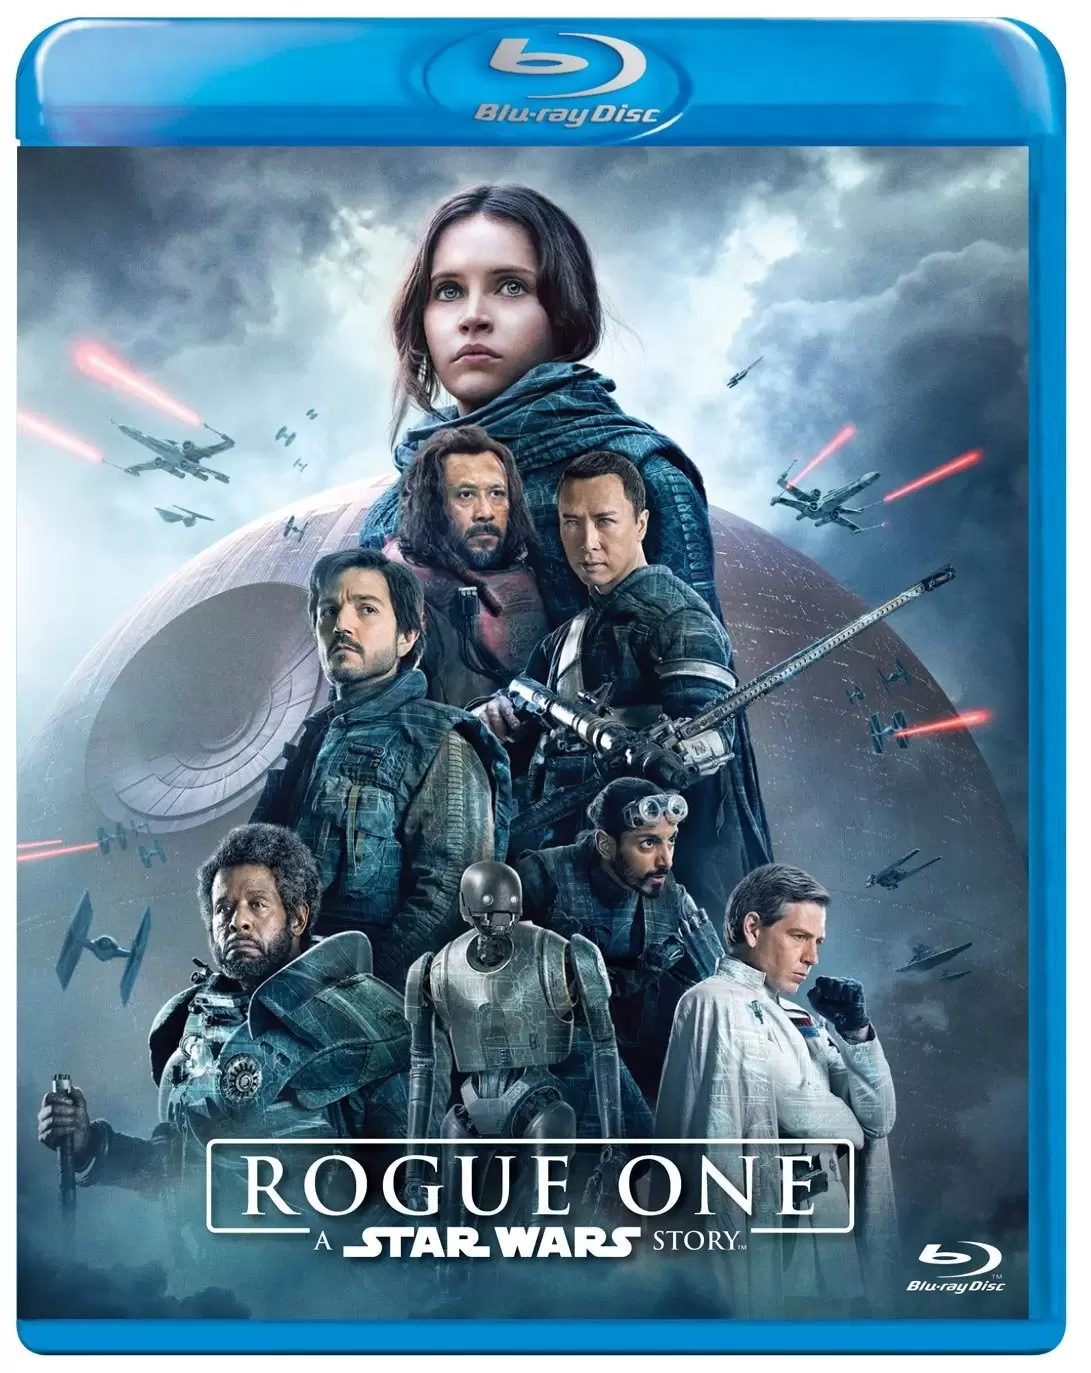 Star Wars - Rogue one :  A Star Wars story